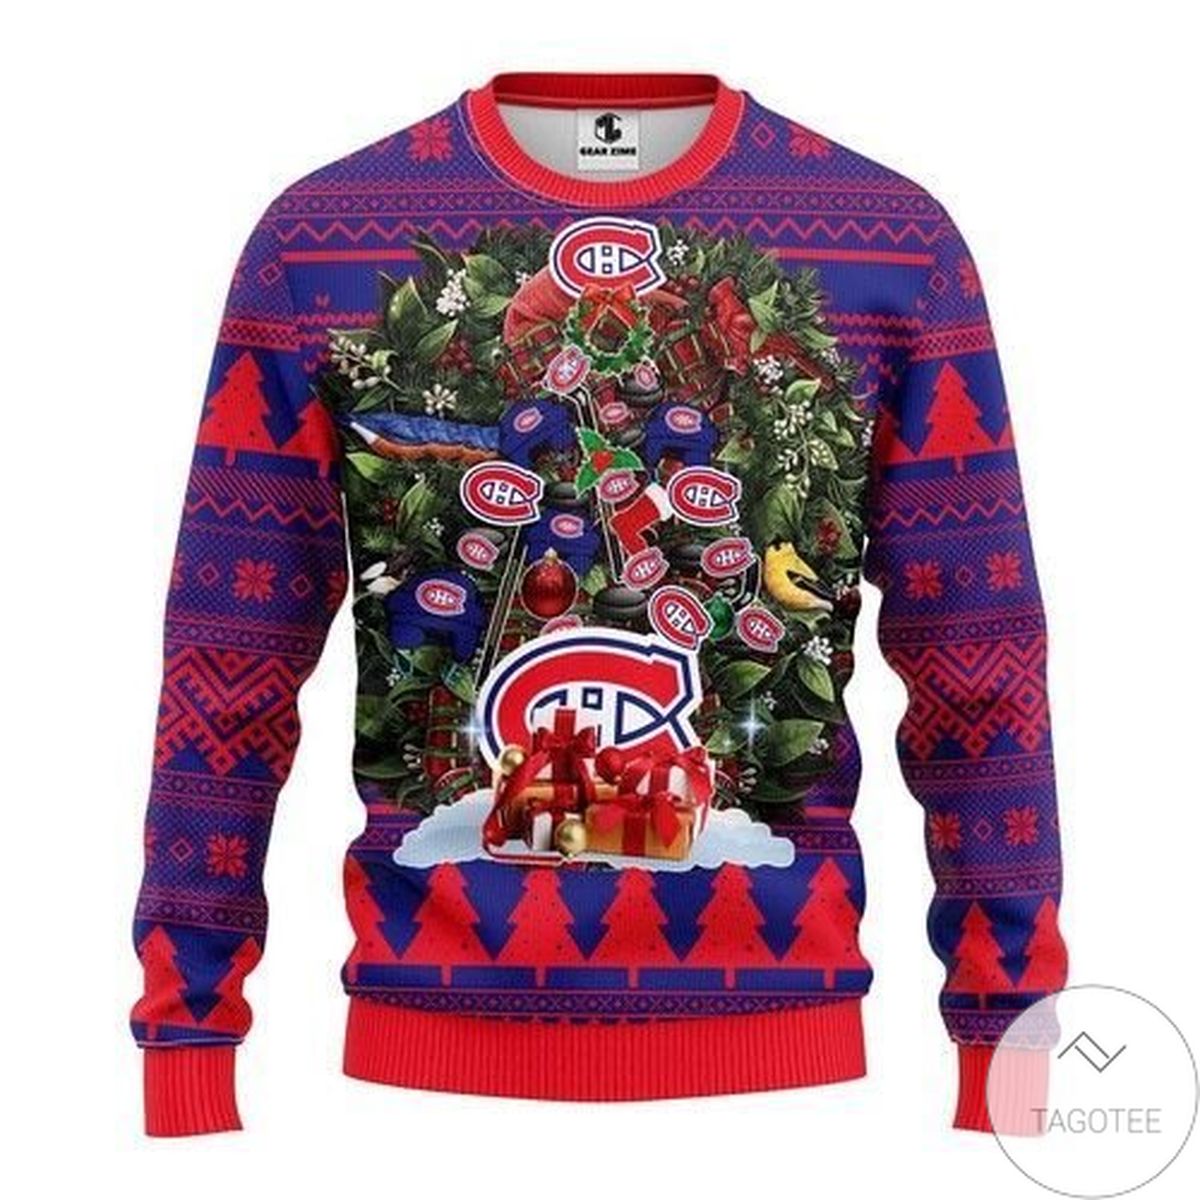 Nhl Montreal Canadiens Ugly Christmas Sweater